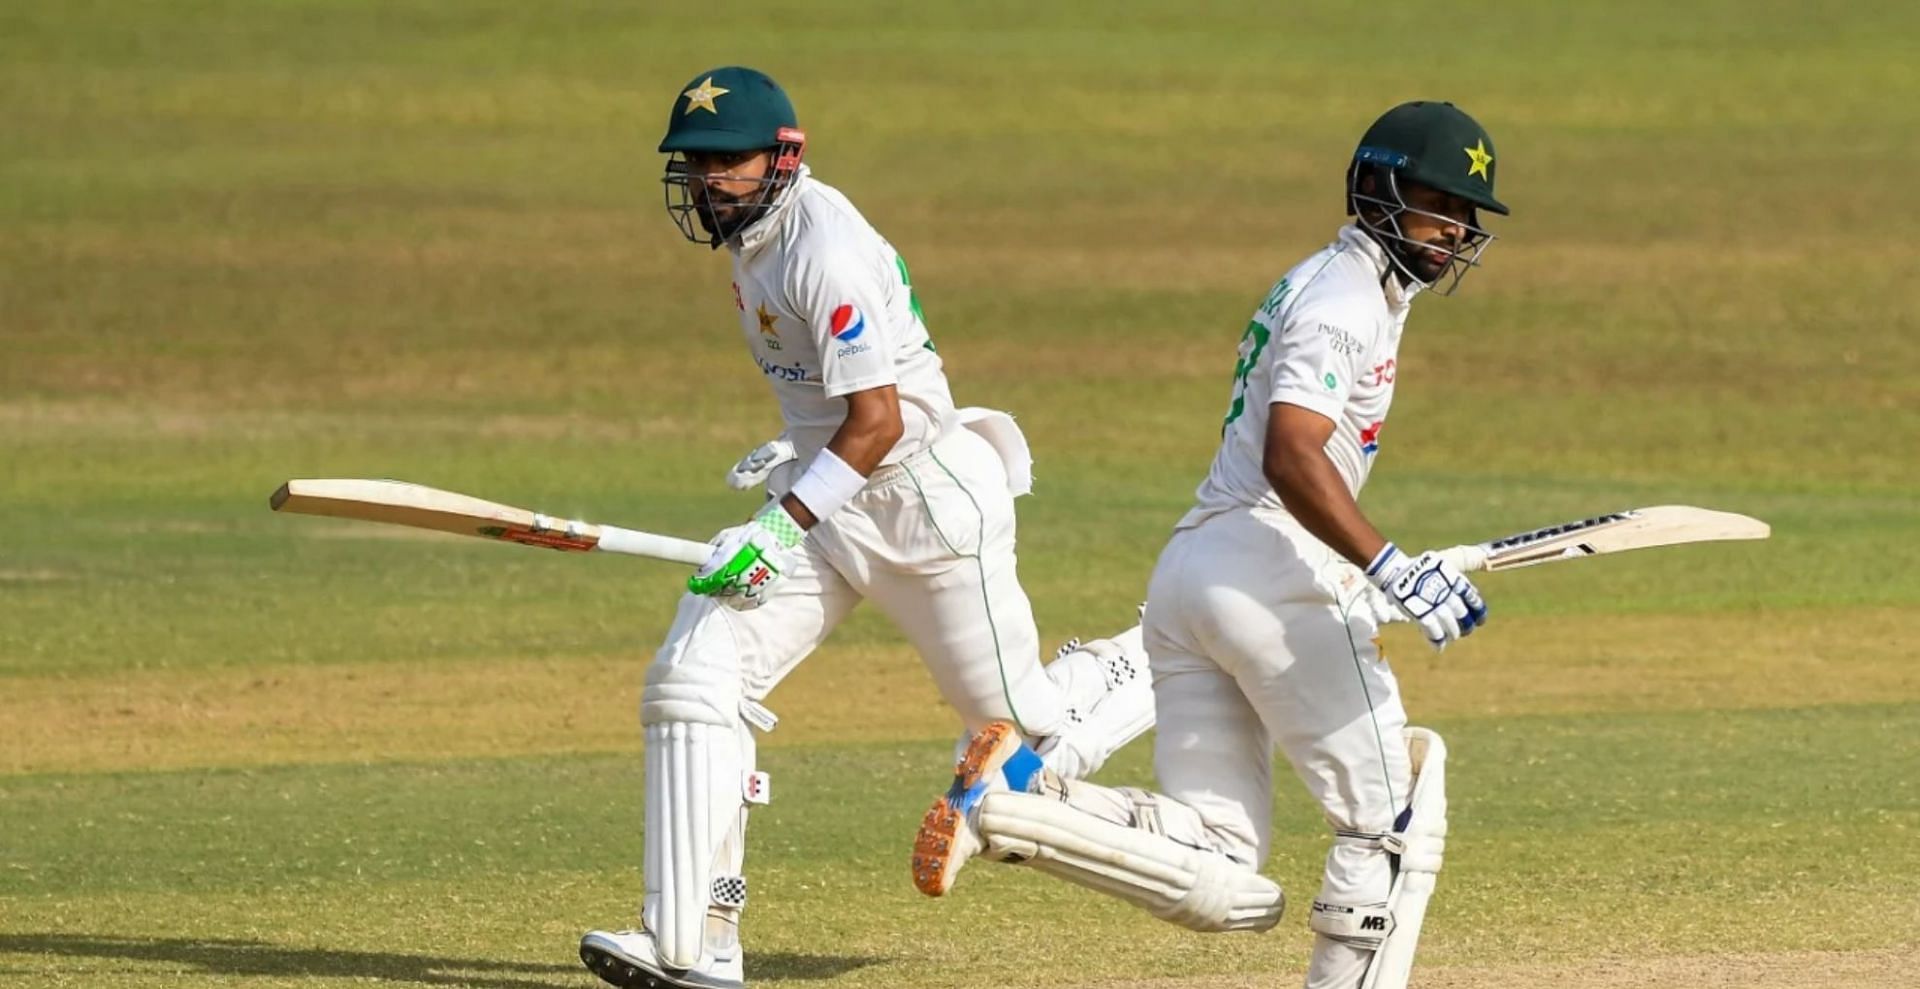 Abdullah Shafique (R) and Babar Azam (L) added 101 runs for the third wicket. (Credit: Getty Images)